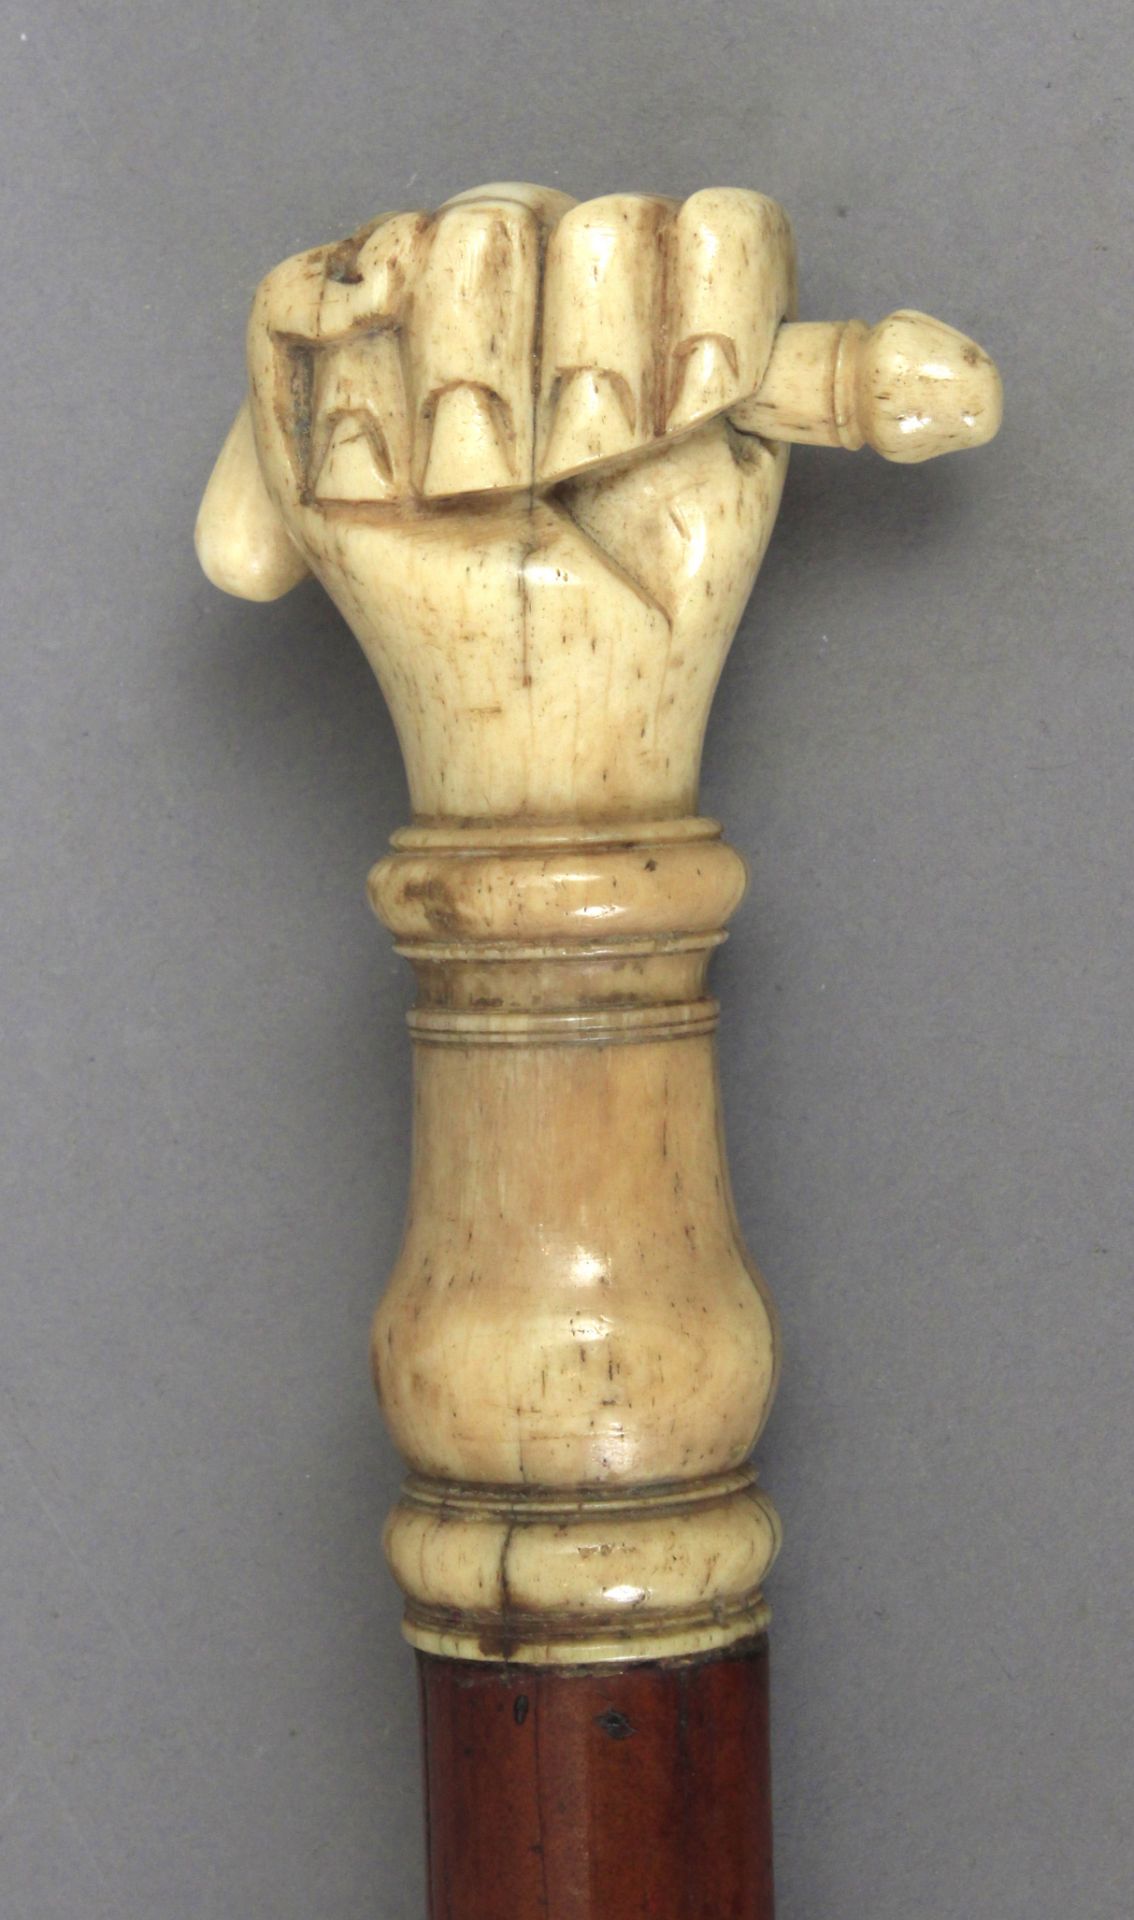 A 19th century cherry tree wood walking cane with a carved bone handle